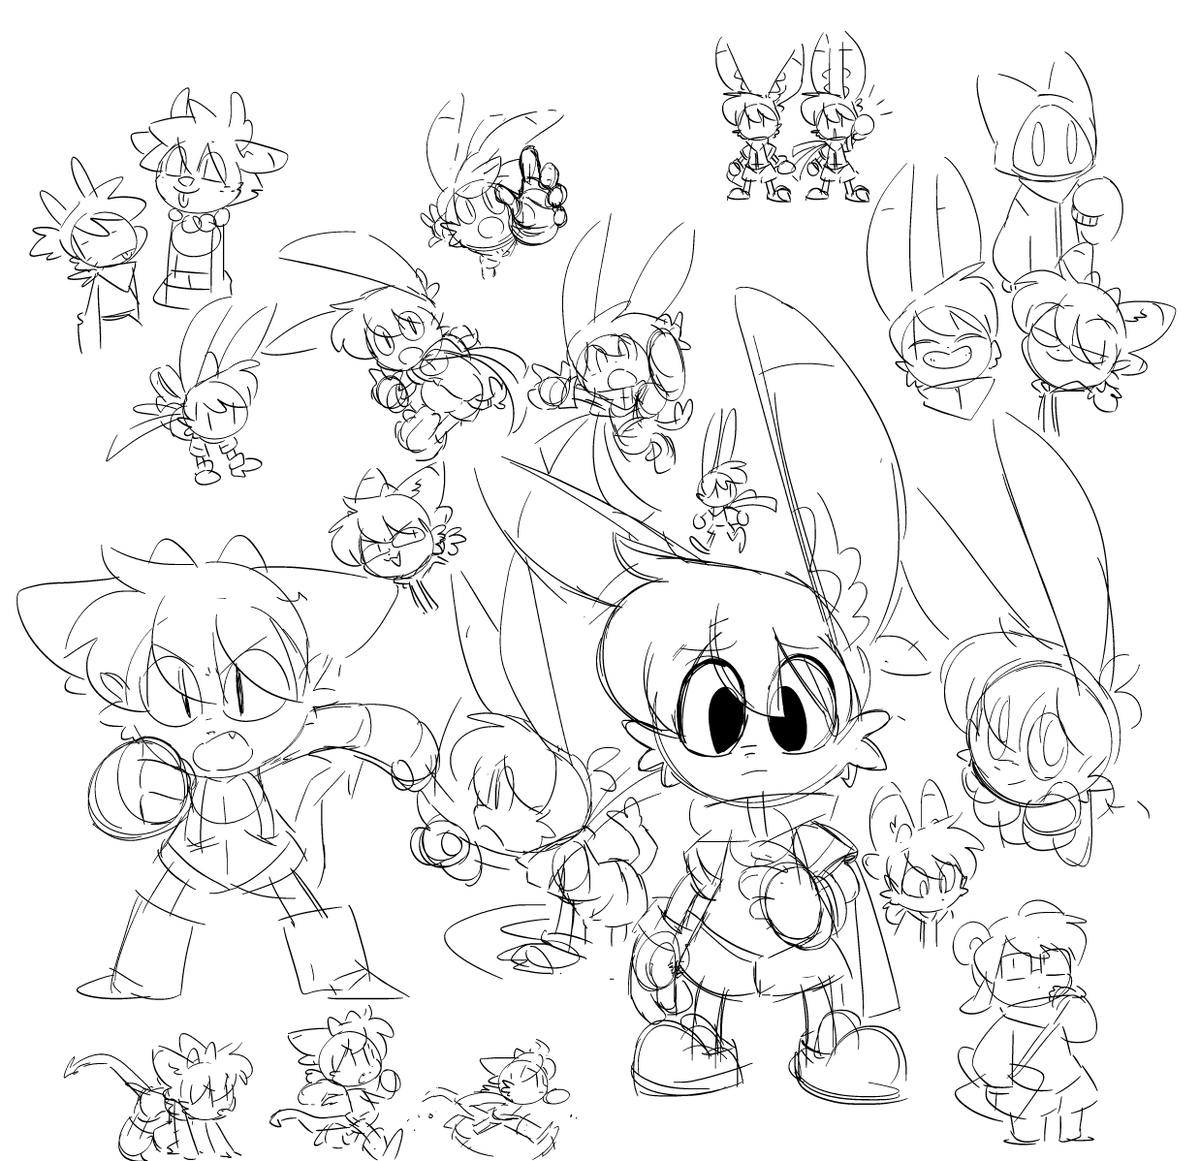 some doodles from patreon a while back 